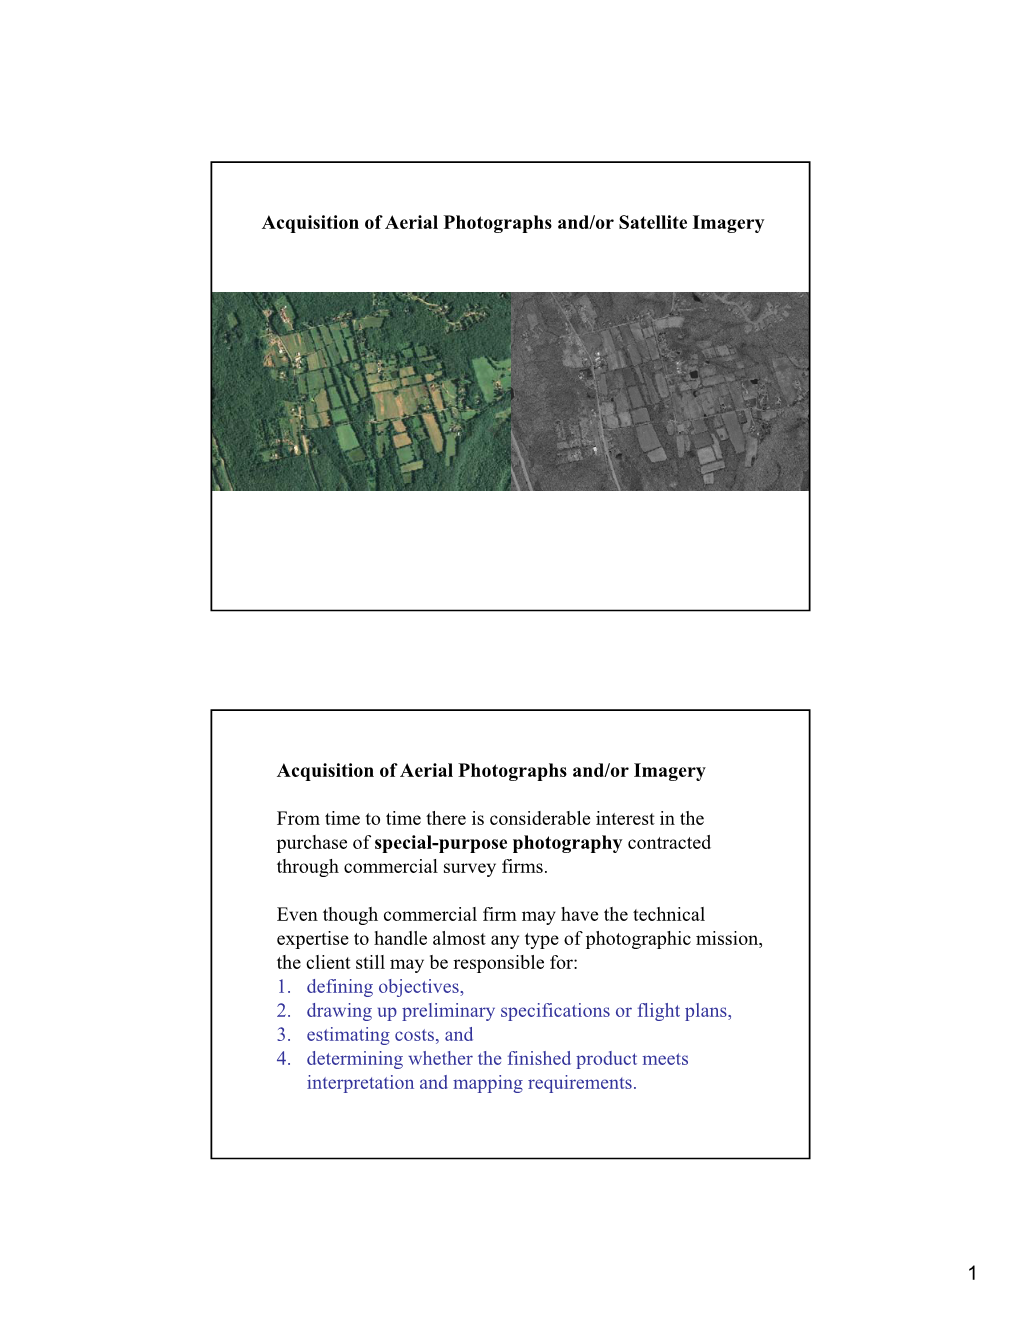 1 Acquisition of Aerial Photographs And/Or Satellite Imagery Acquisition